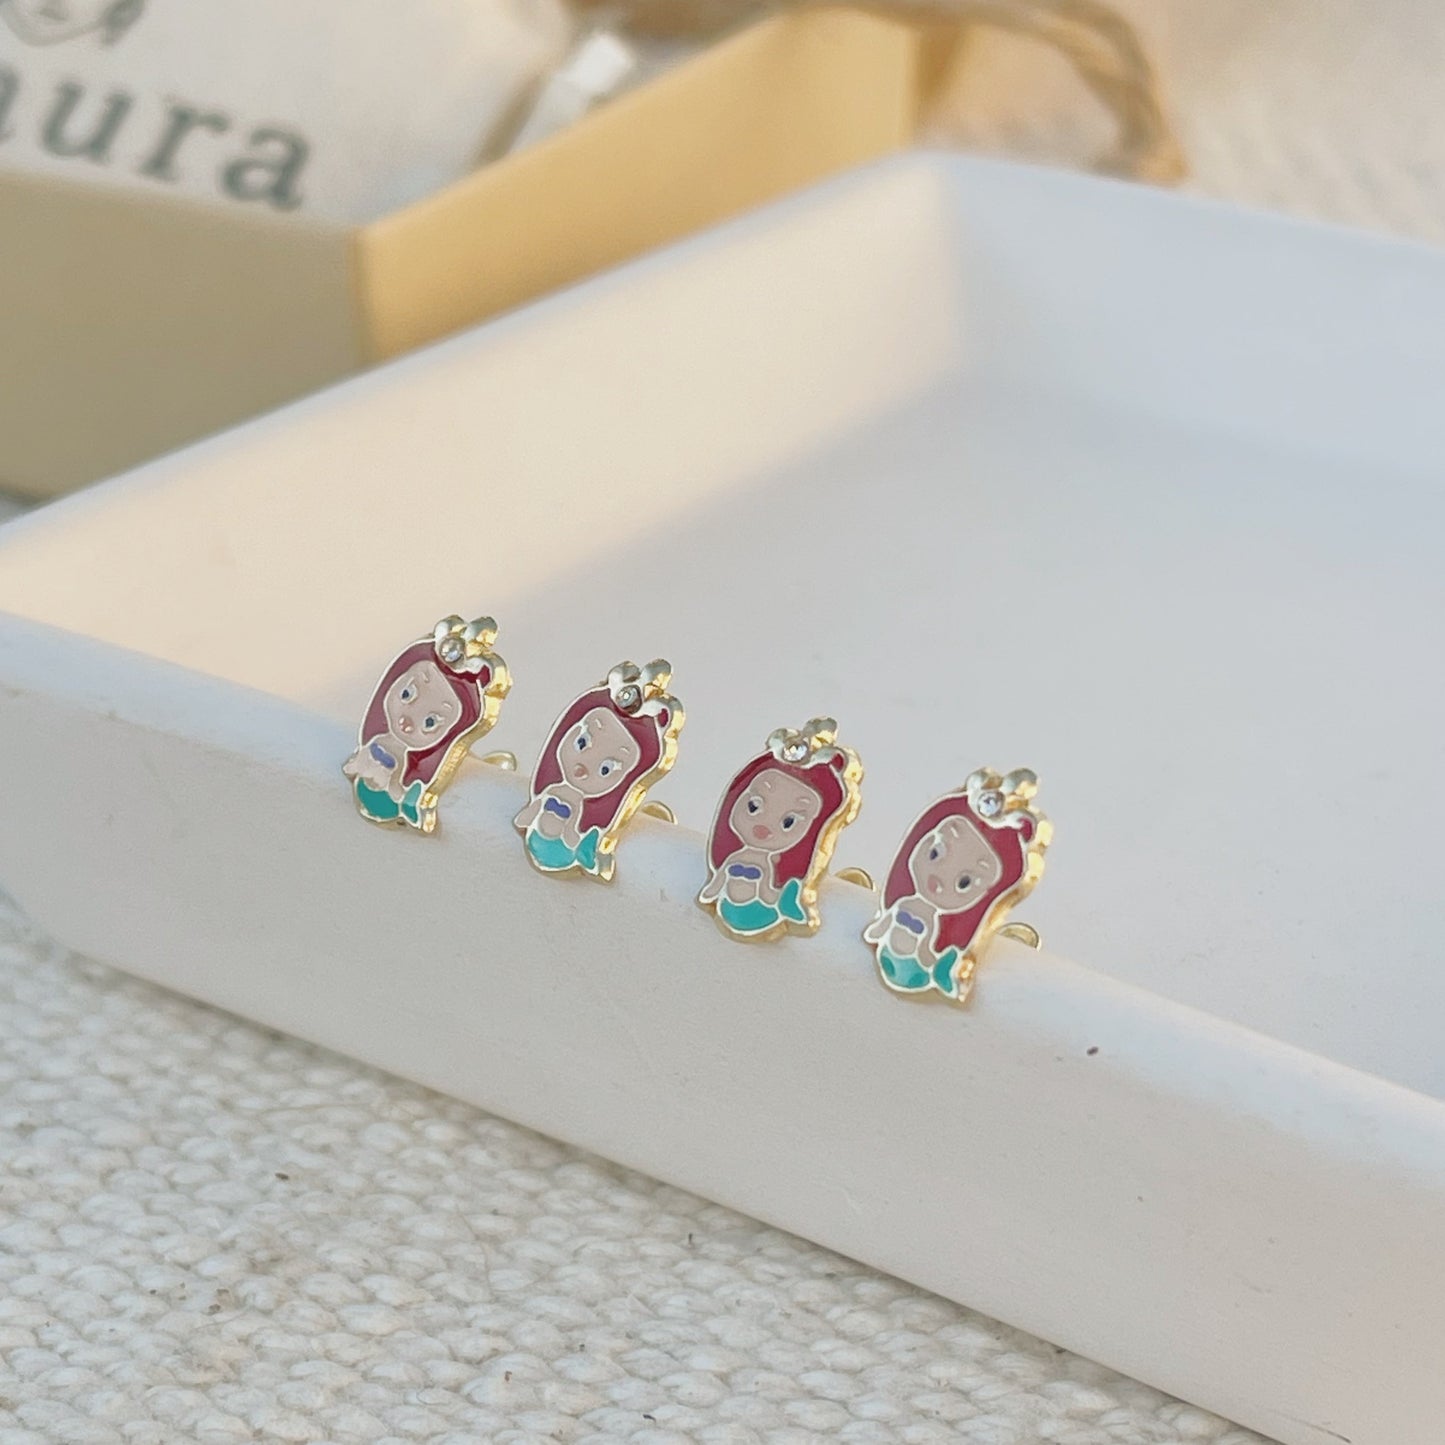 These 10K Gold Princess Earrings are the perfect gift for little girls who love the Little Mermaid. Inspired by Ariel, these earrings are sure to make every little girl feel like a princess